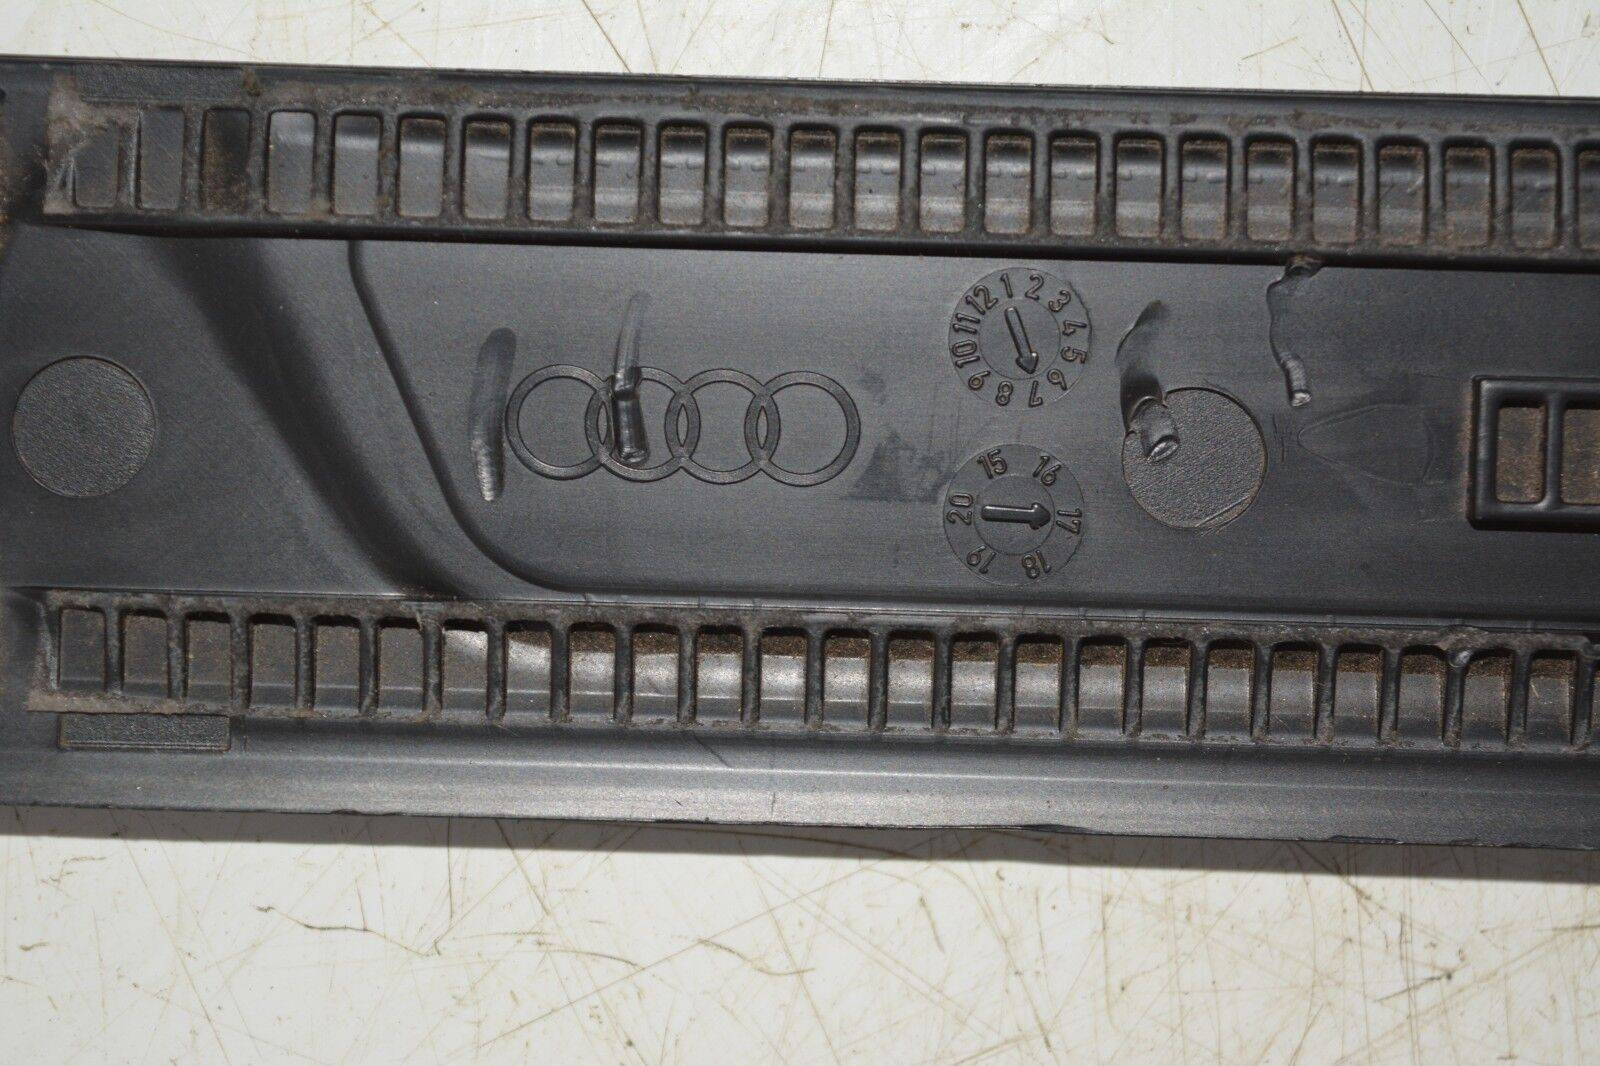 Audi-A4-Door-Sill-Entry-Trim-Front-Left-8W0853373F-Genuine-176469540383-9